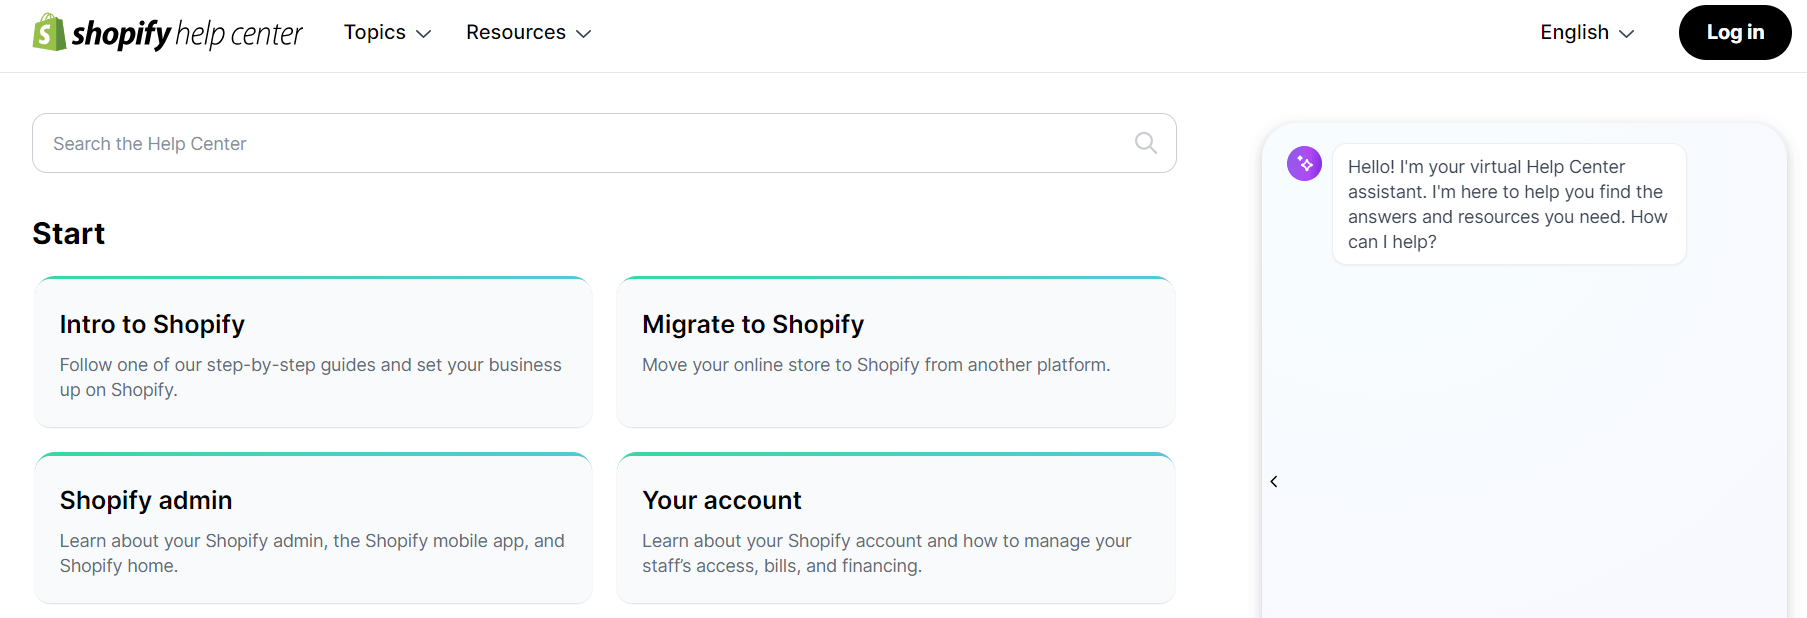 Access the Shopify Help Center